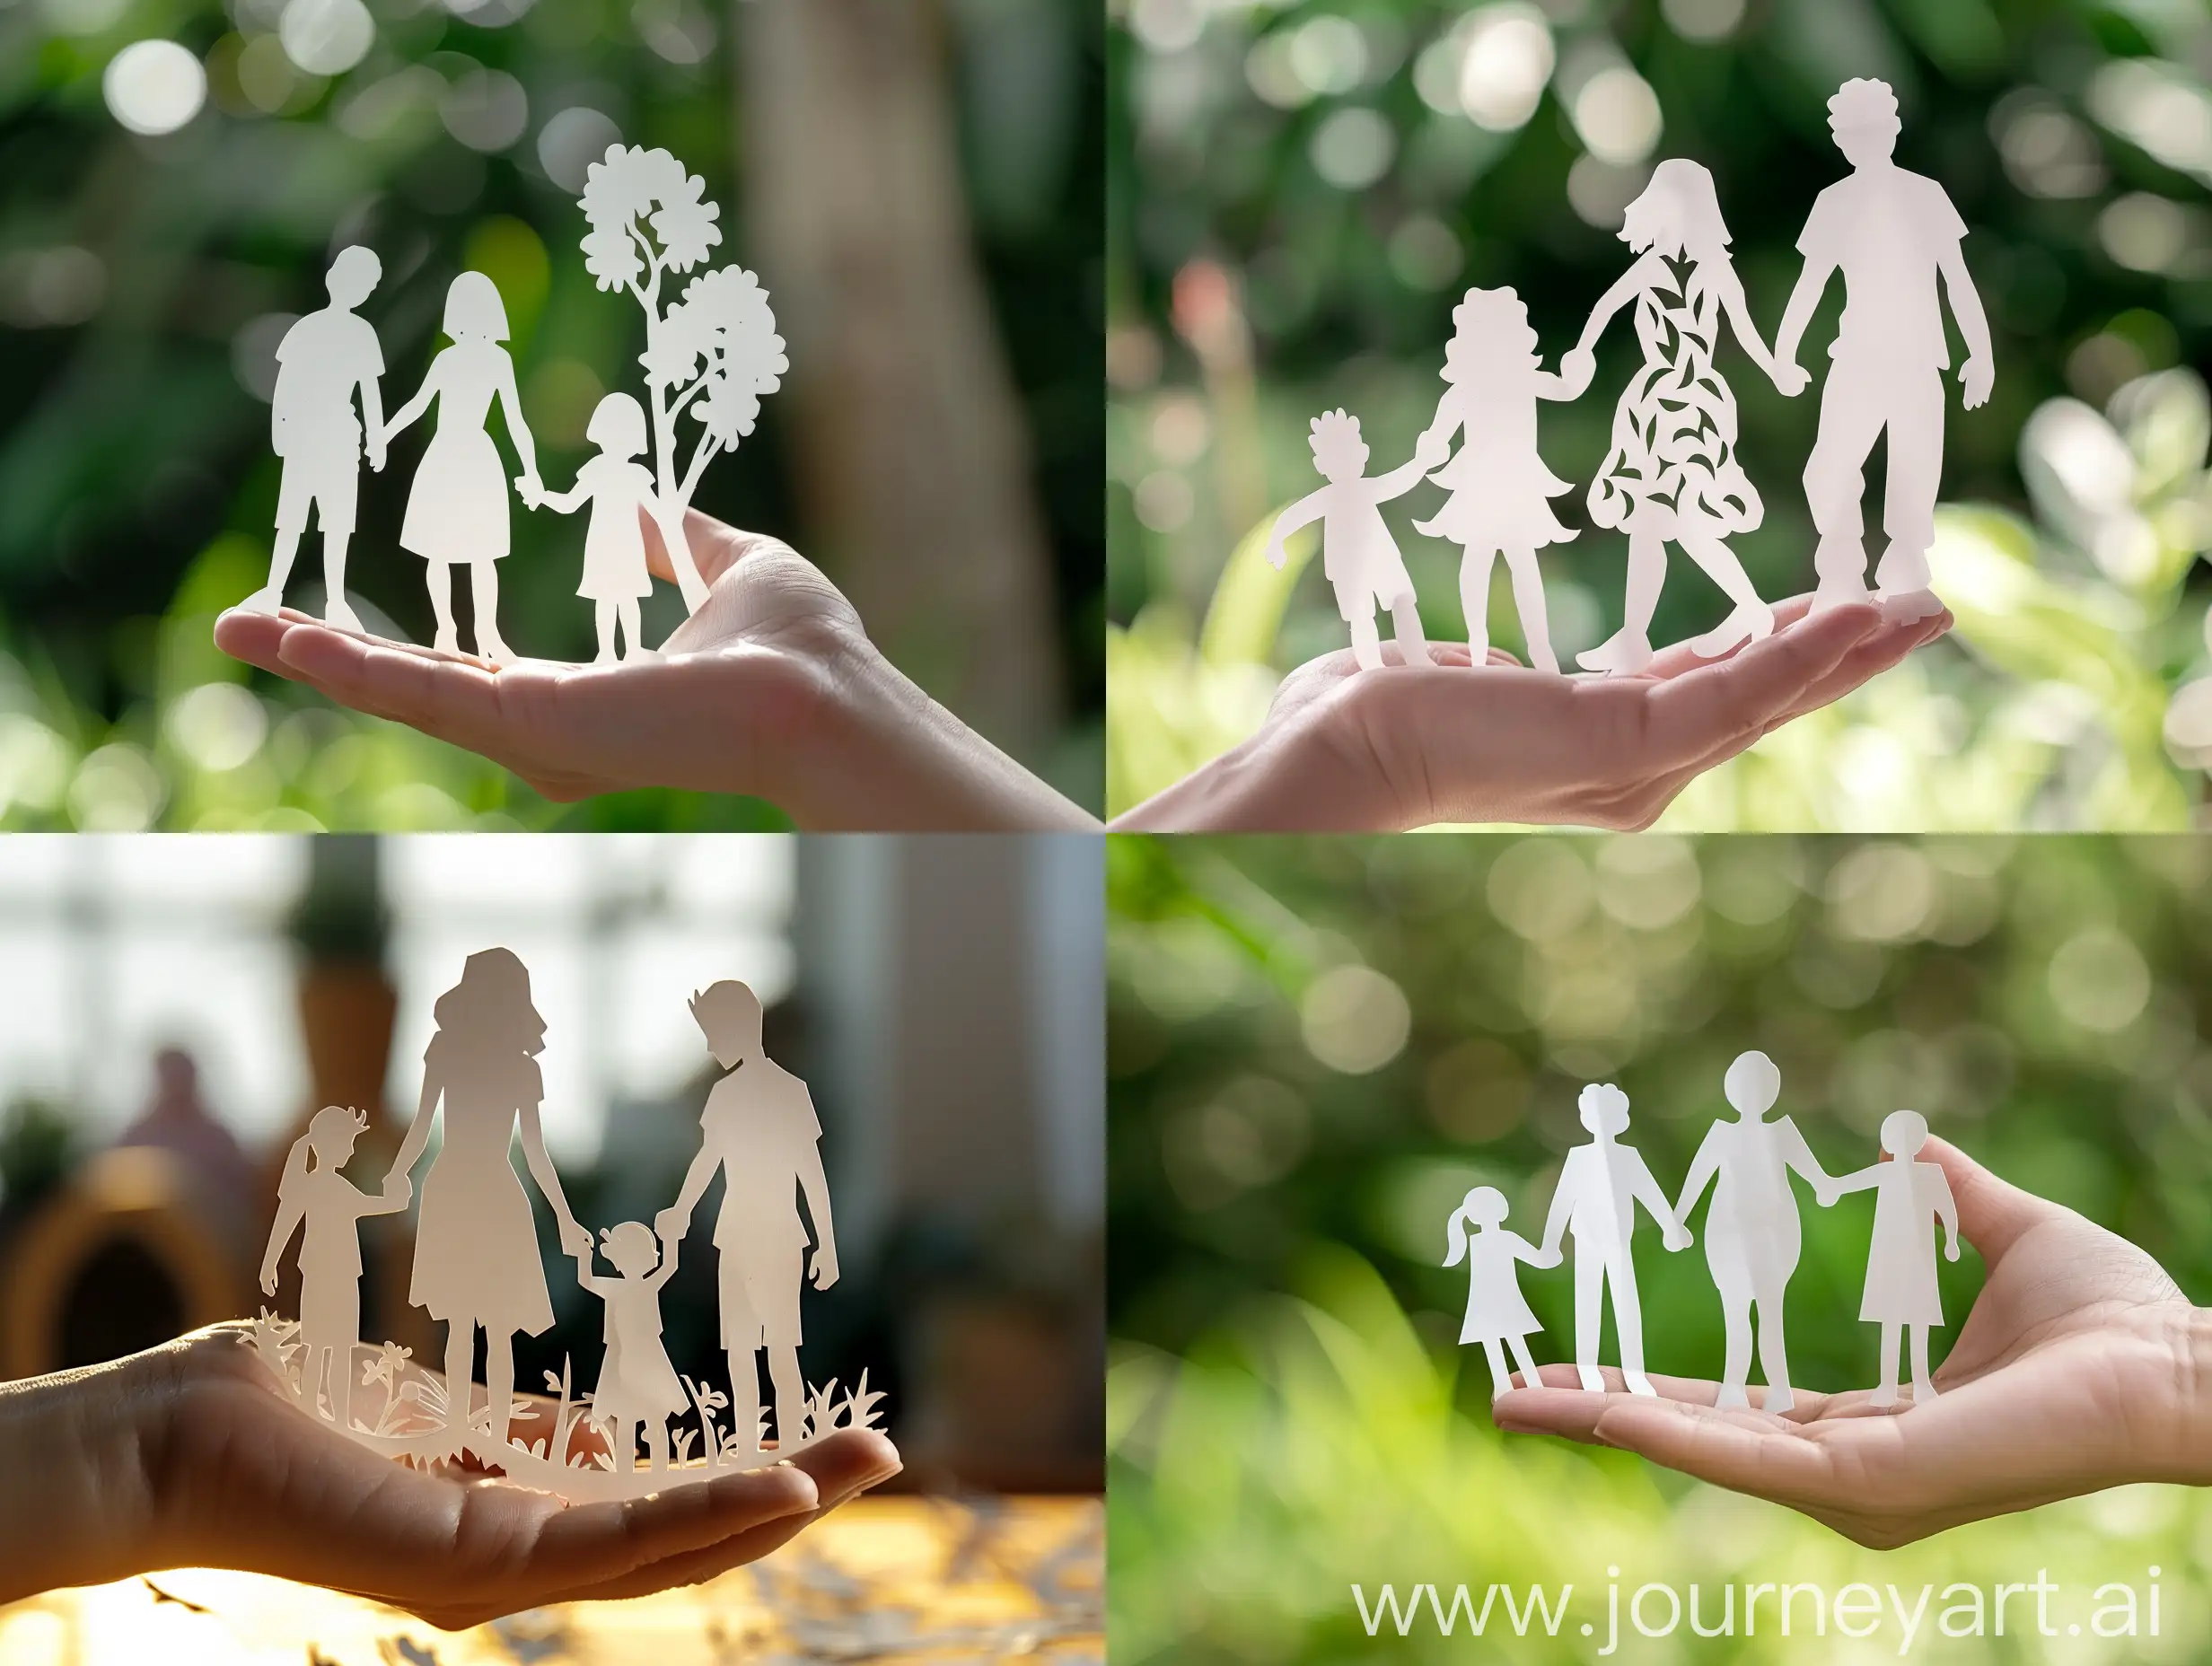 Hand holding paper cut family, family home, foster care, homeless support, social distancing, world mental health day, Autism support, homescholing education, lockdown concept